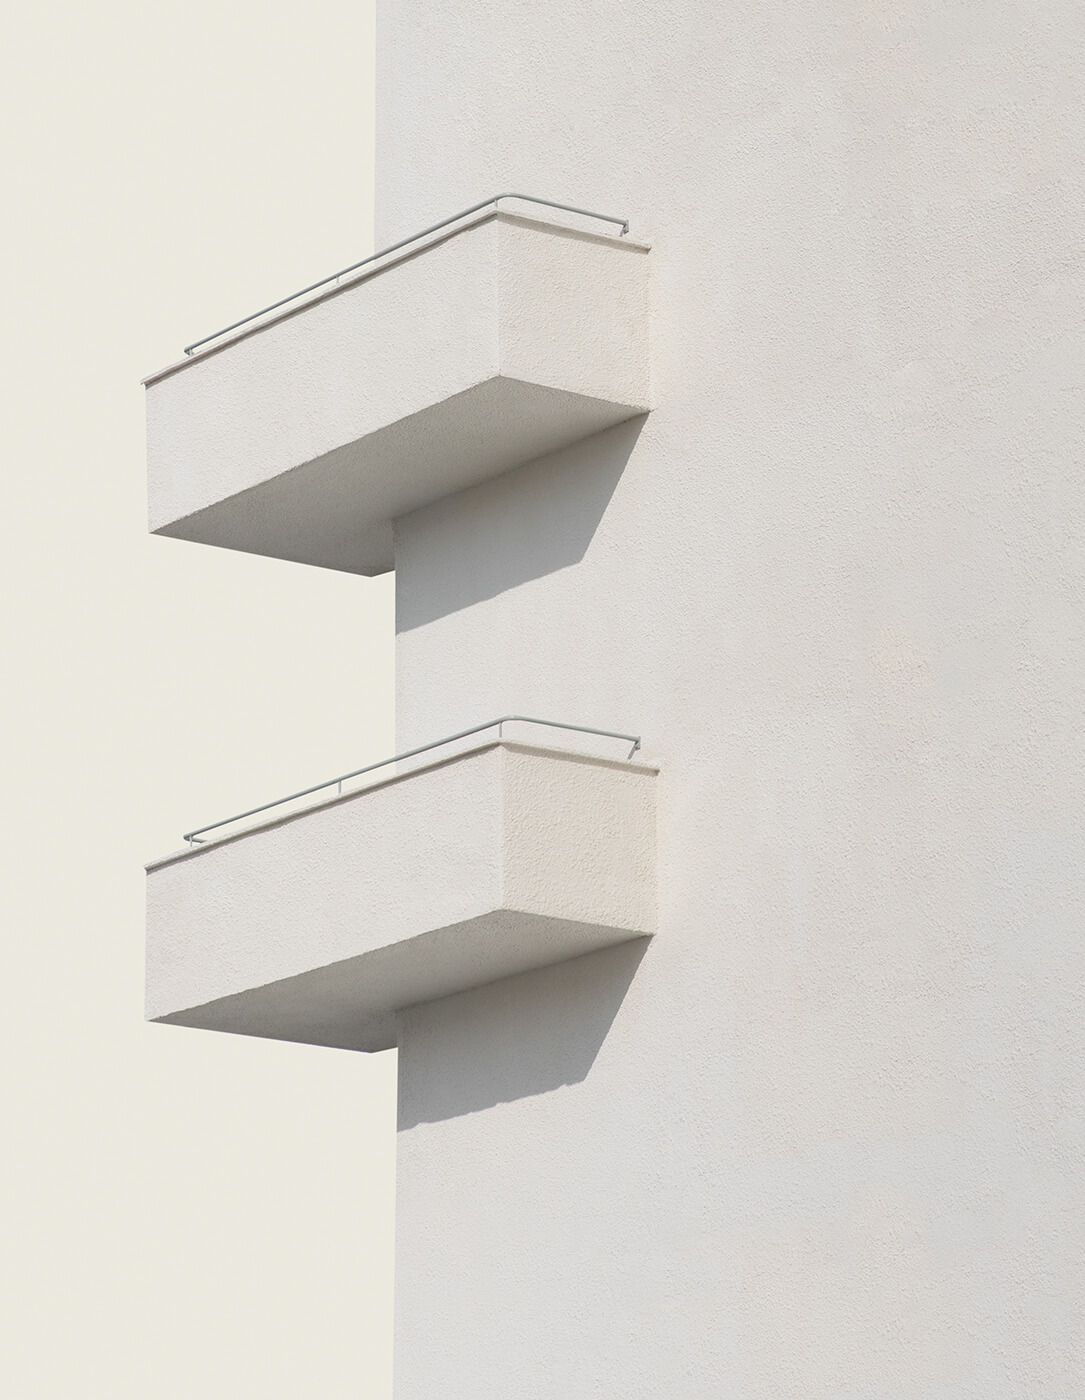 A minimalistic architectural image of a building with two balconies